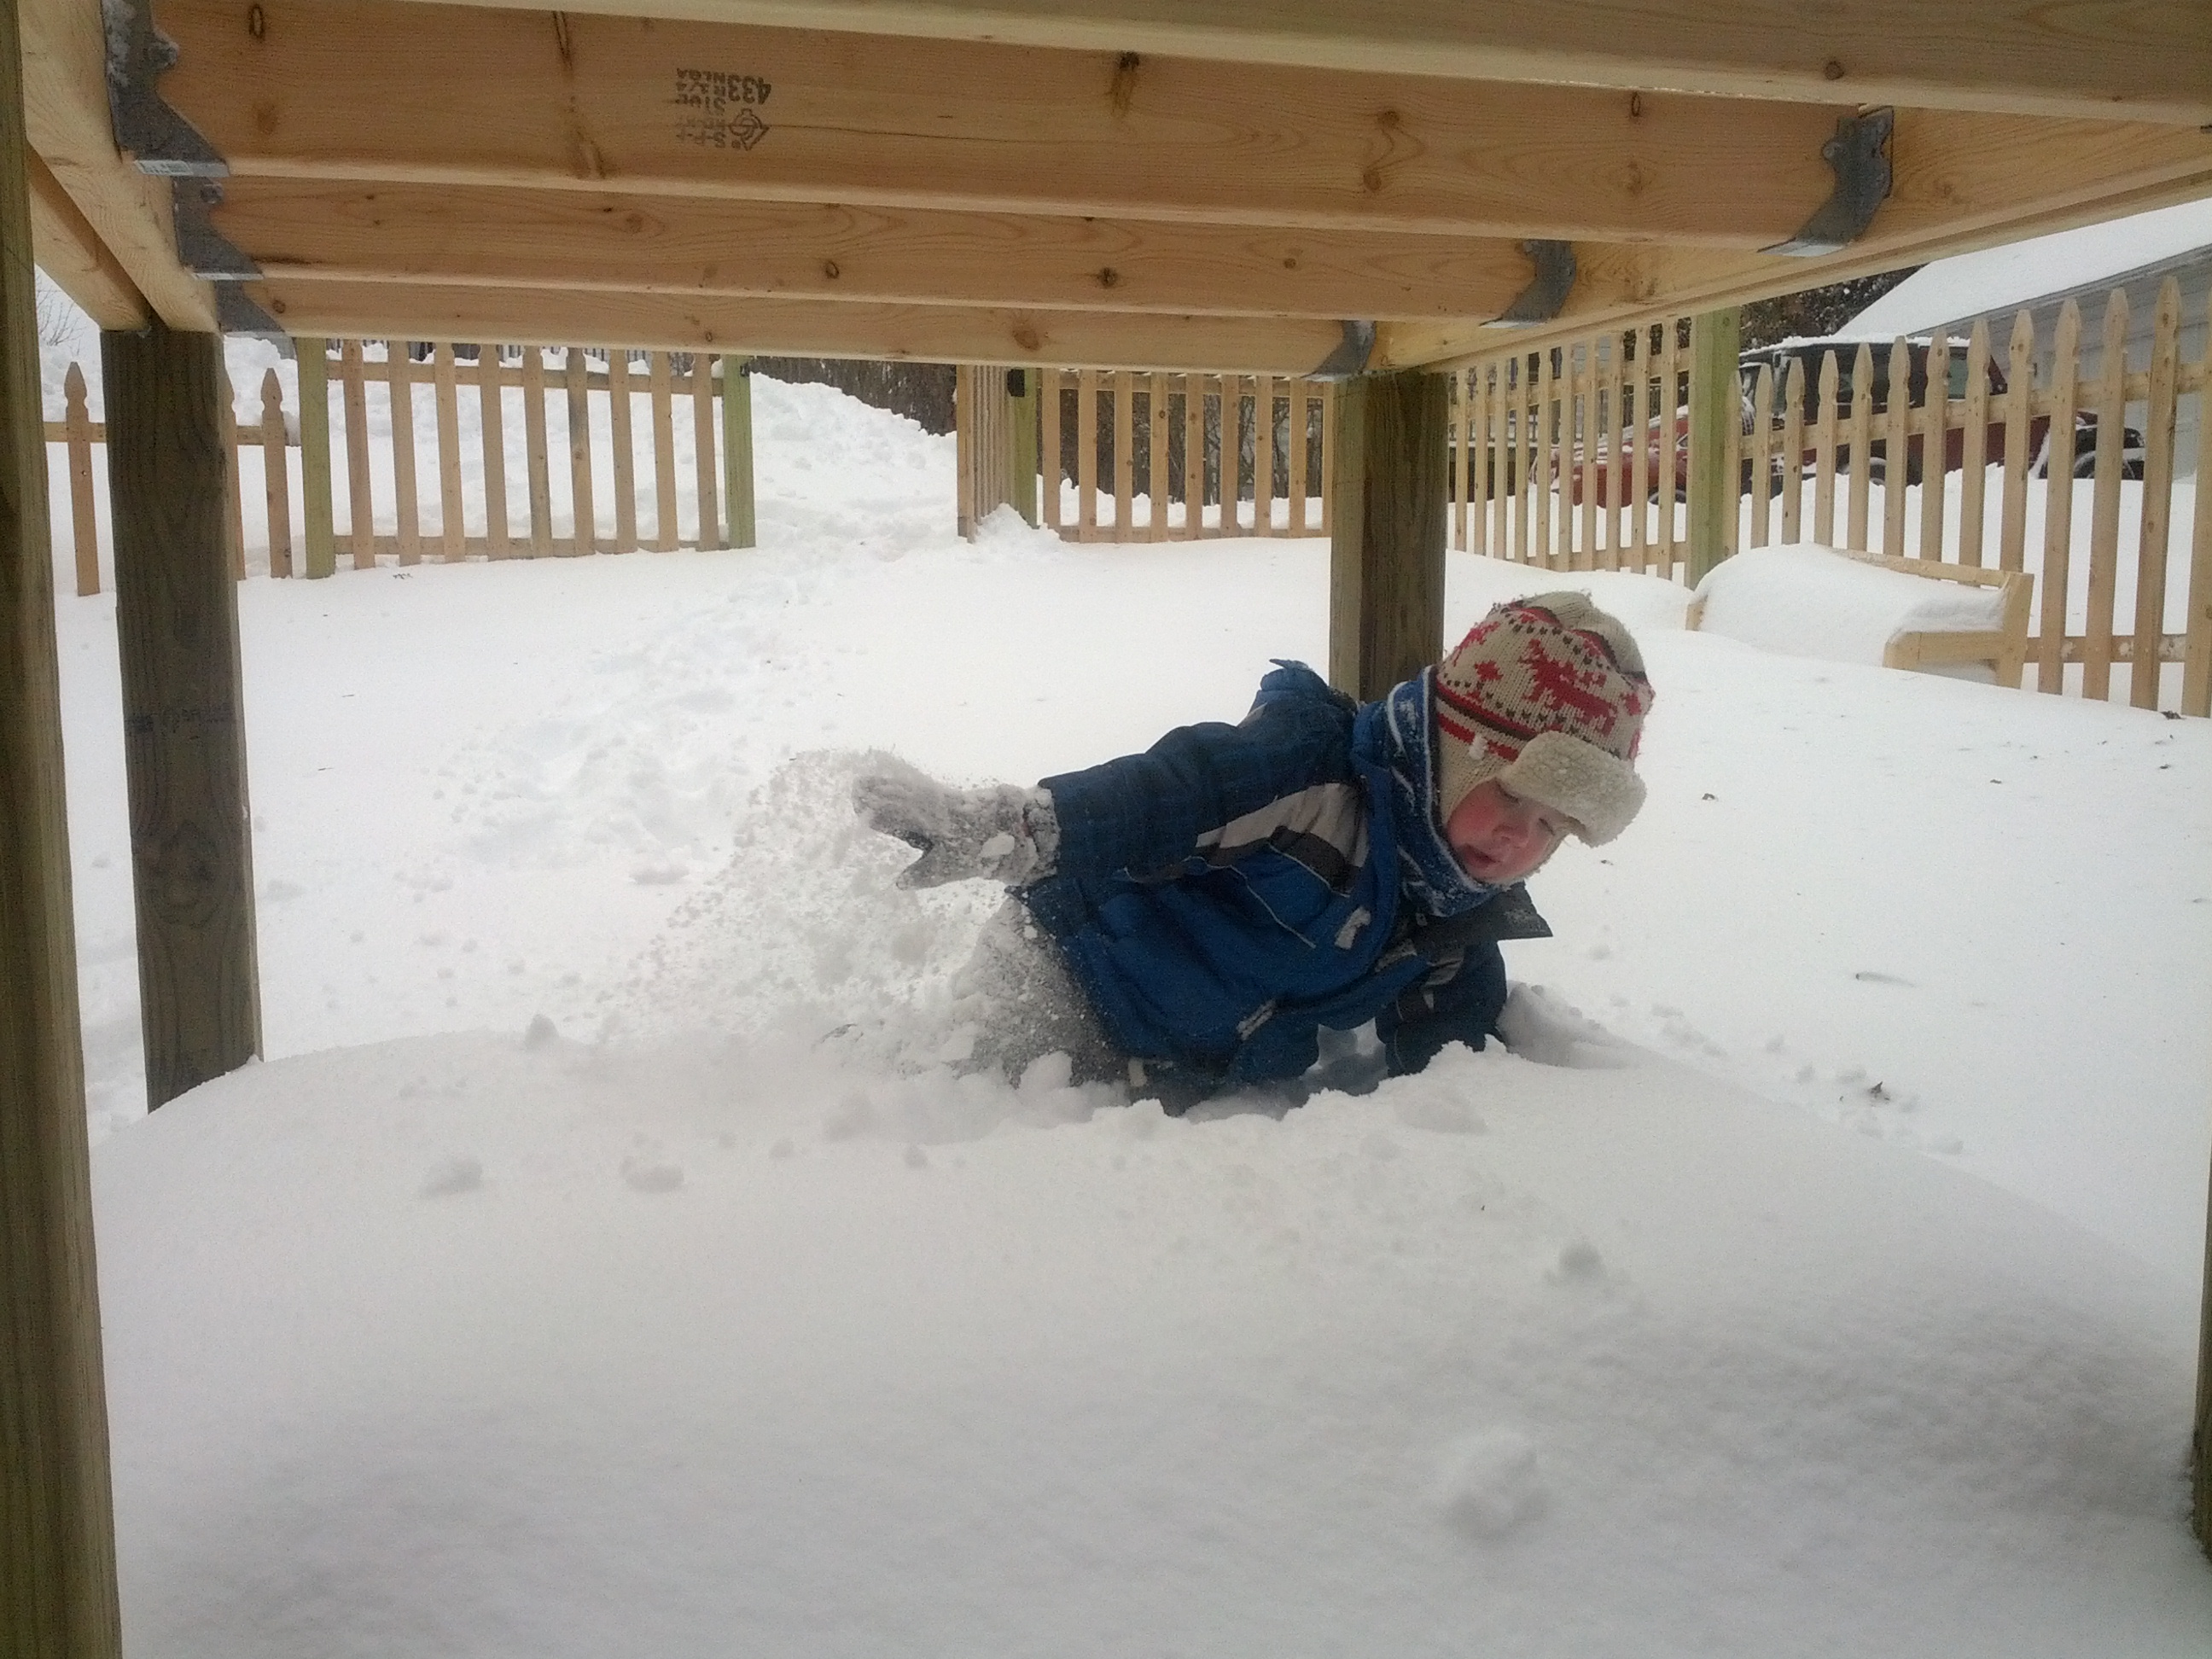 Trying to dig out the sandbox after the first big snowstorm